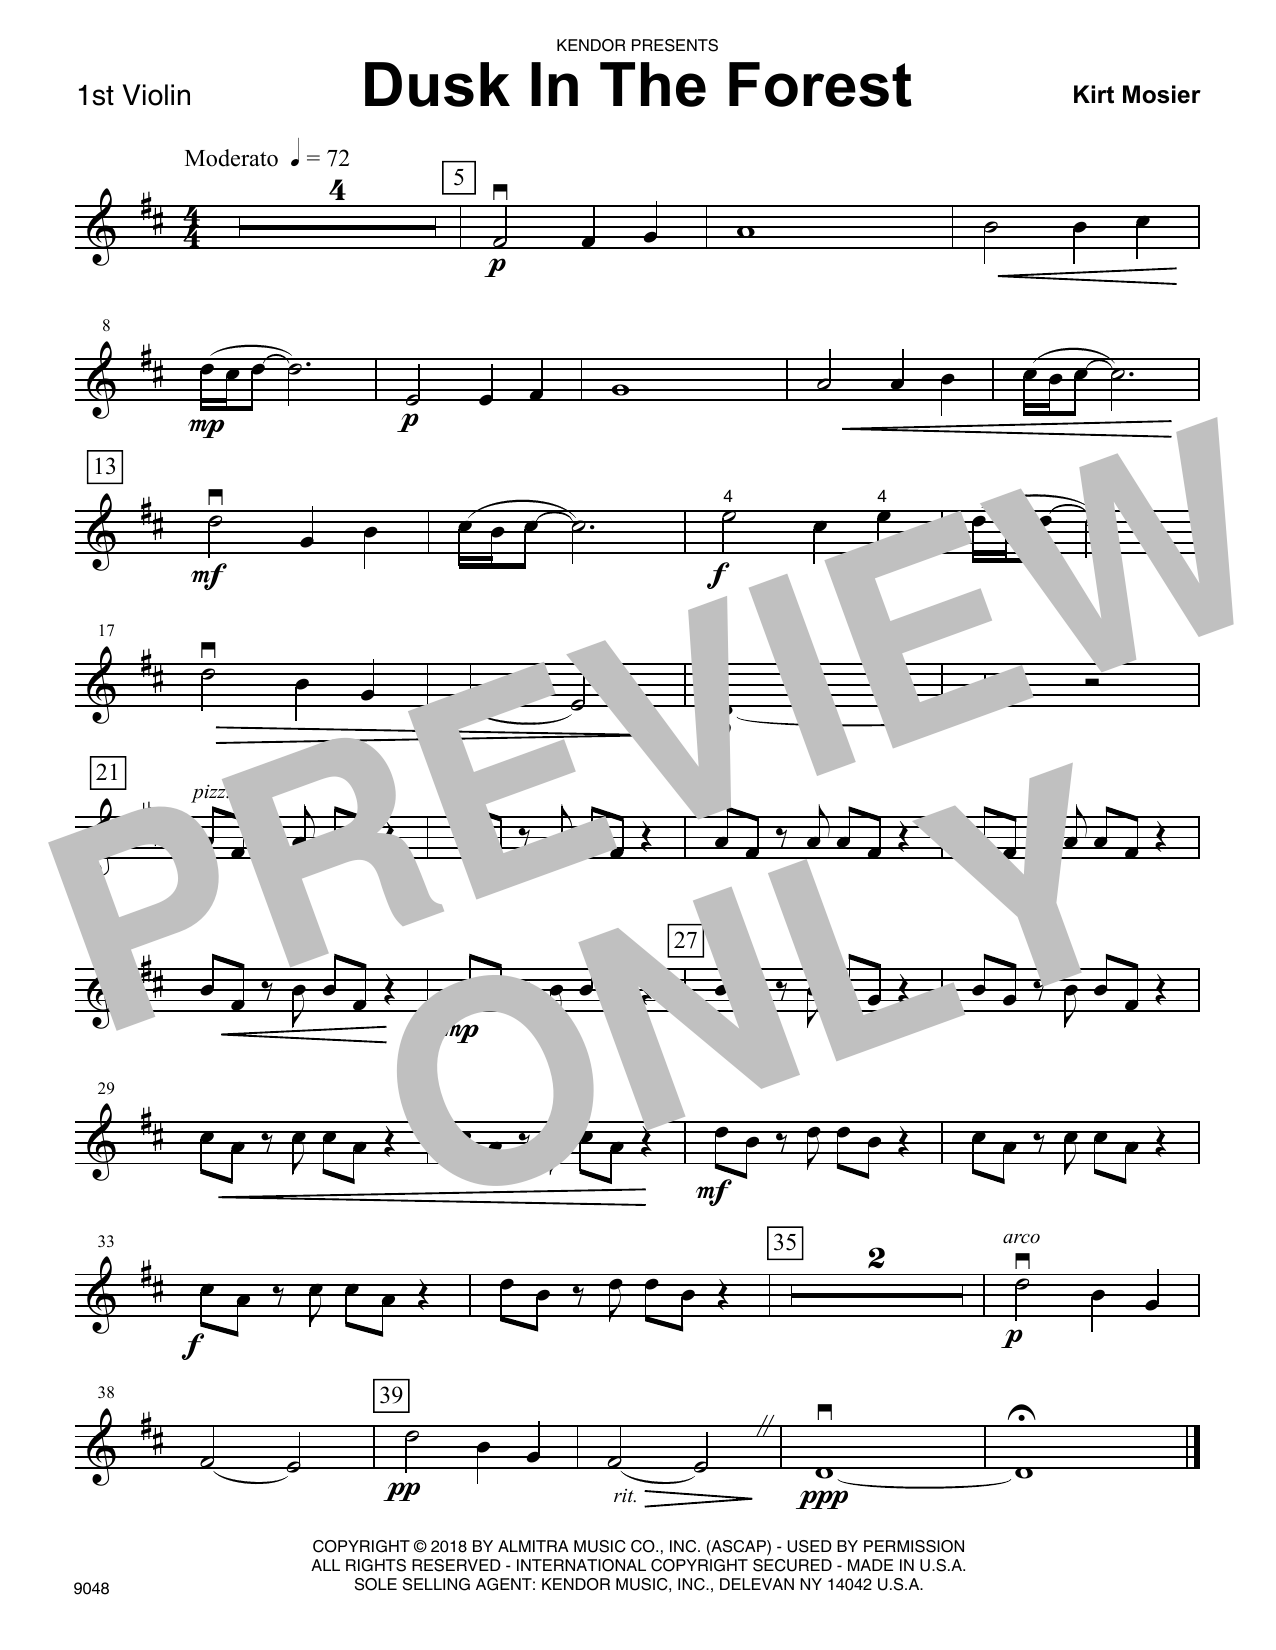 Download Kirt Mosier Dusk In The Forest - 1st Violin Sheet Music